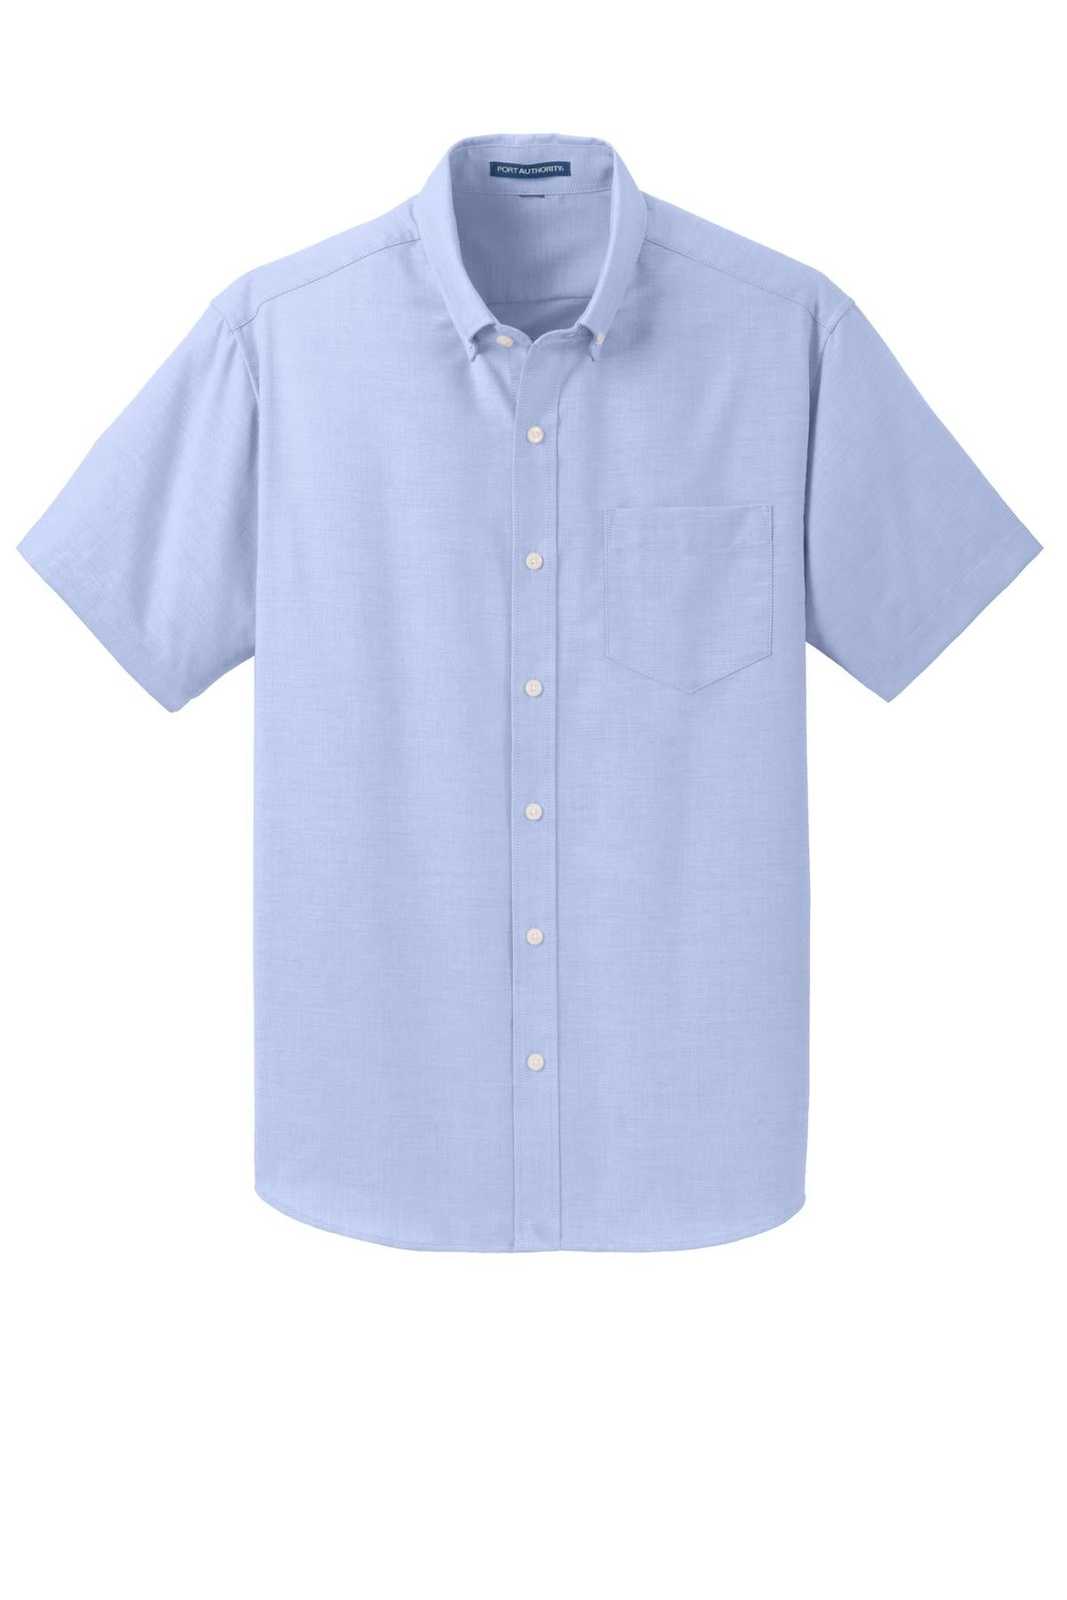 Port Authority S659 Short Sleeve Superpro Oxford Shirt - Oxford Blue - HIT a Double - 5